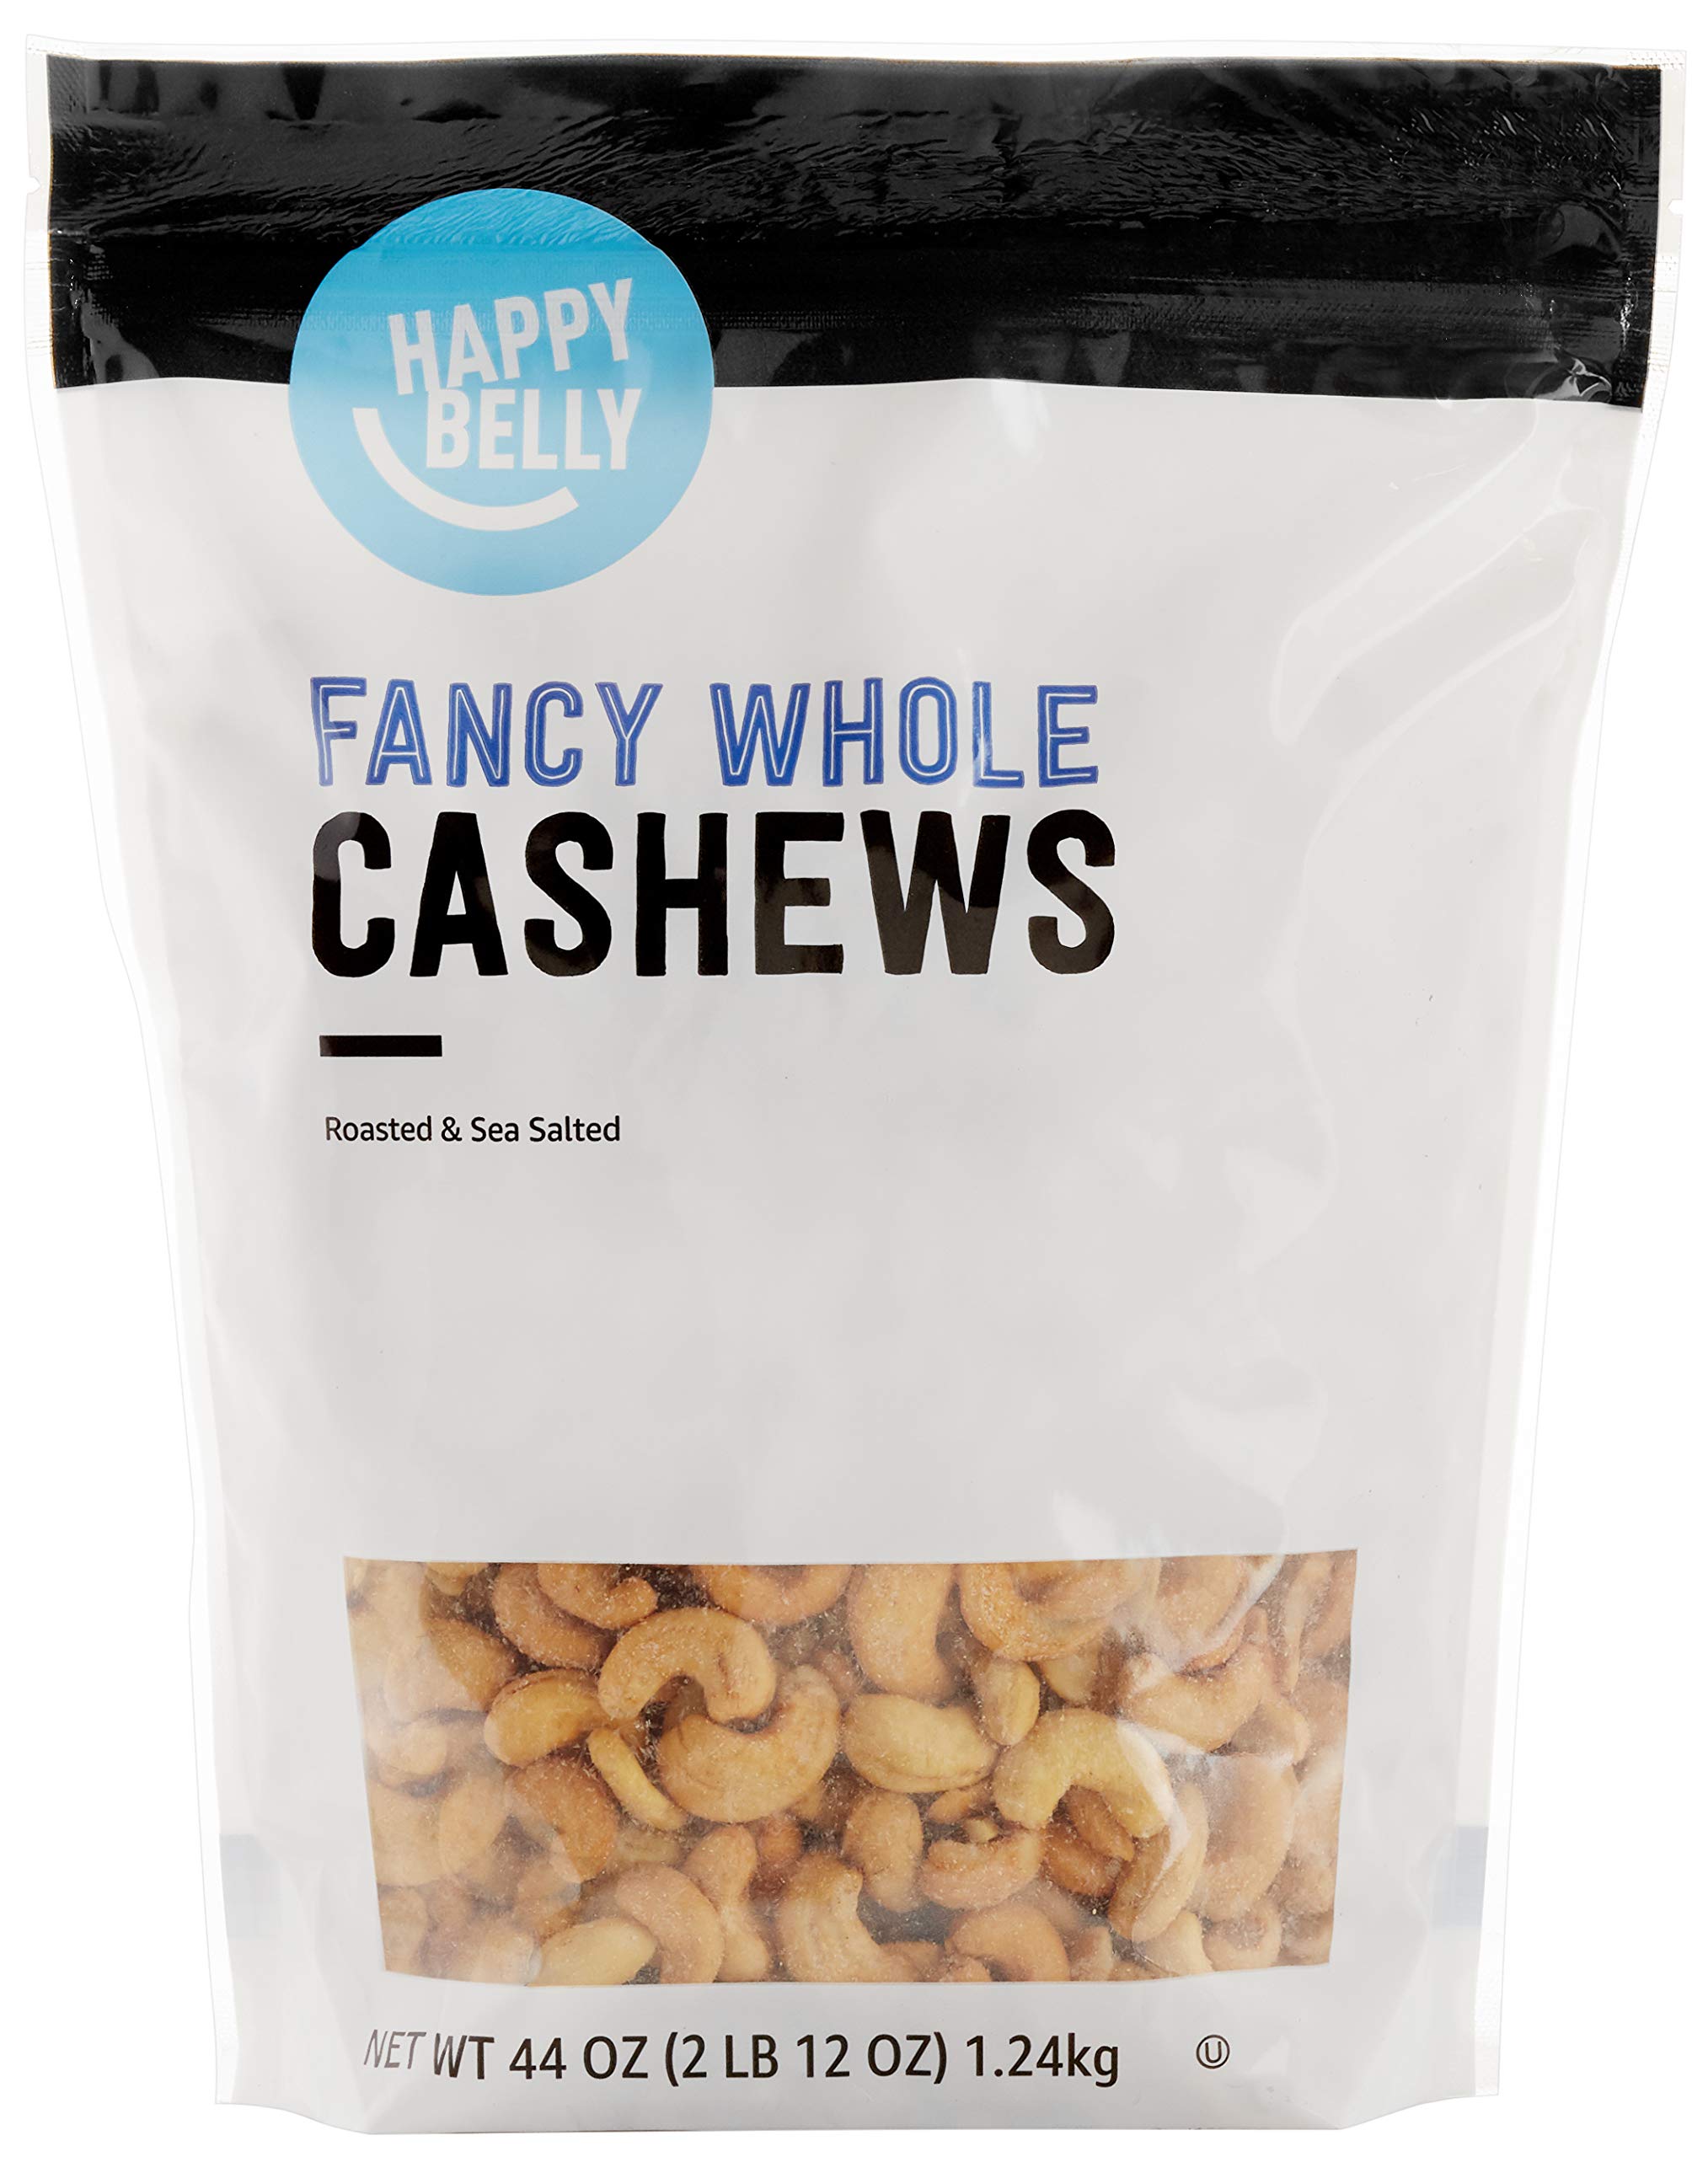 ymmv Amazon Brand - Happy Belly Fancy Whole Cashews, 44 Ounce extra 40% for 1st subscribe and save - $10.23